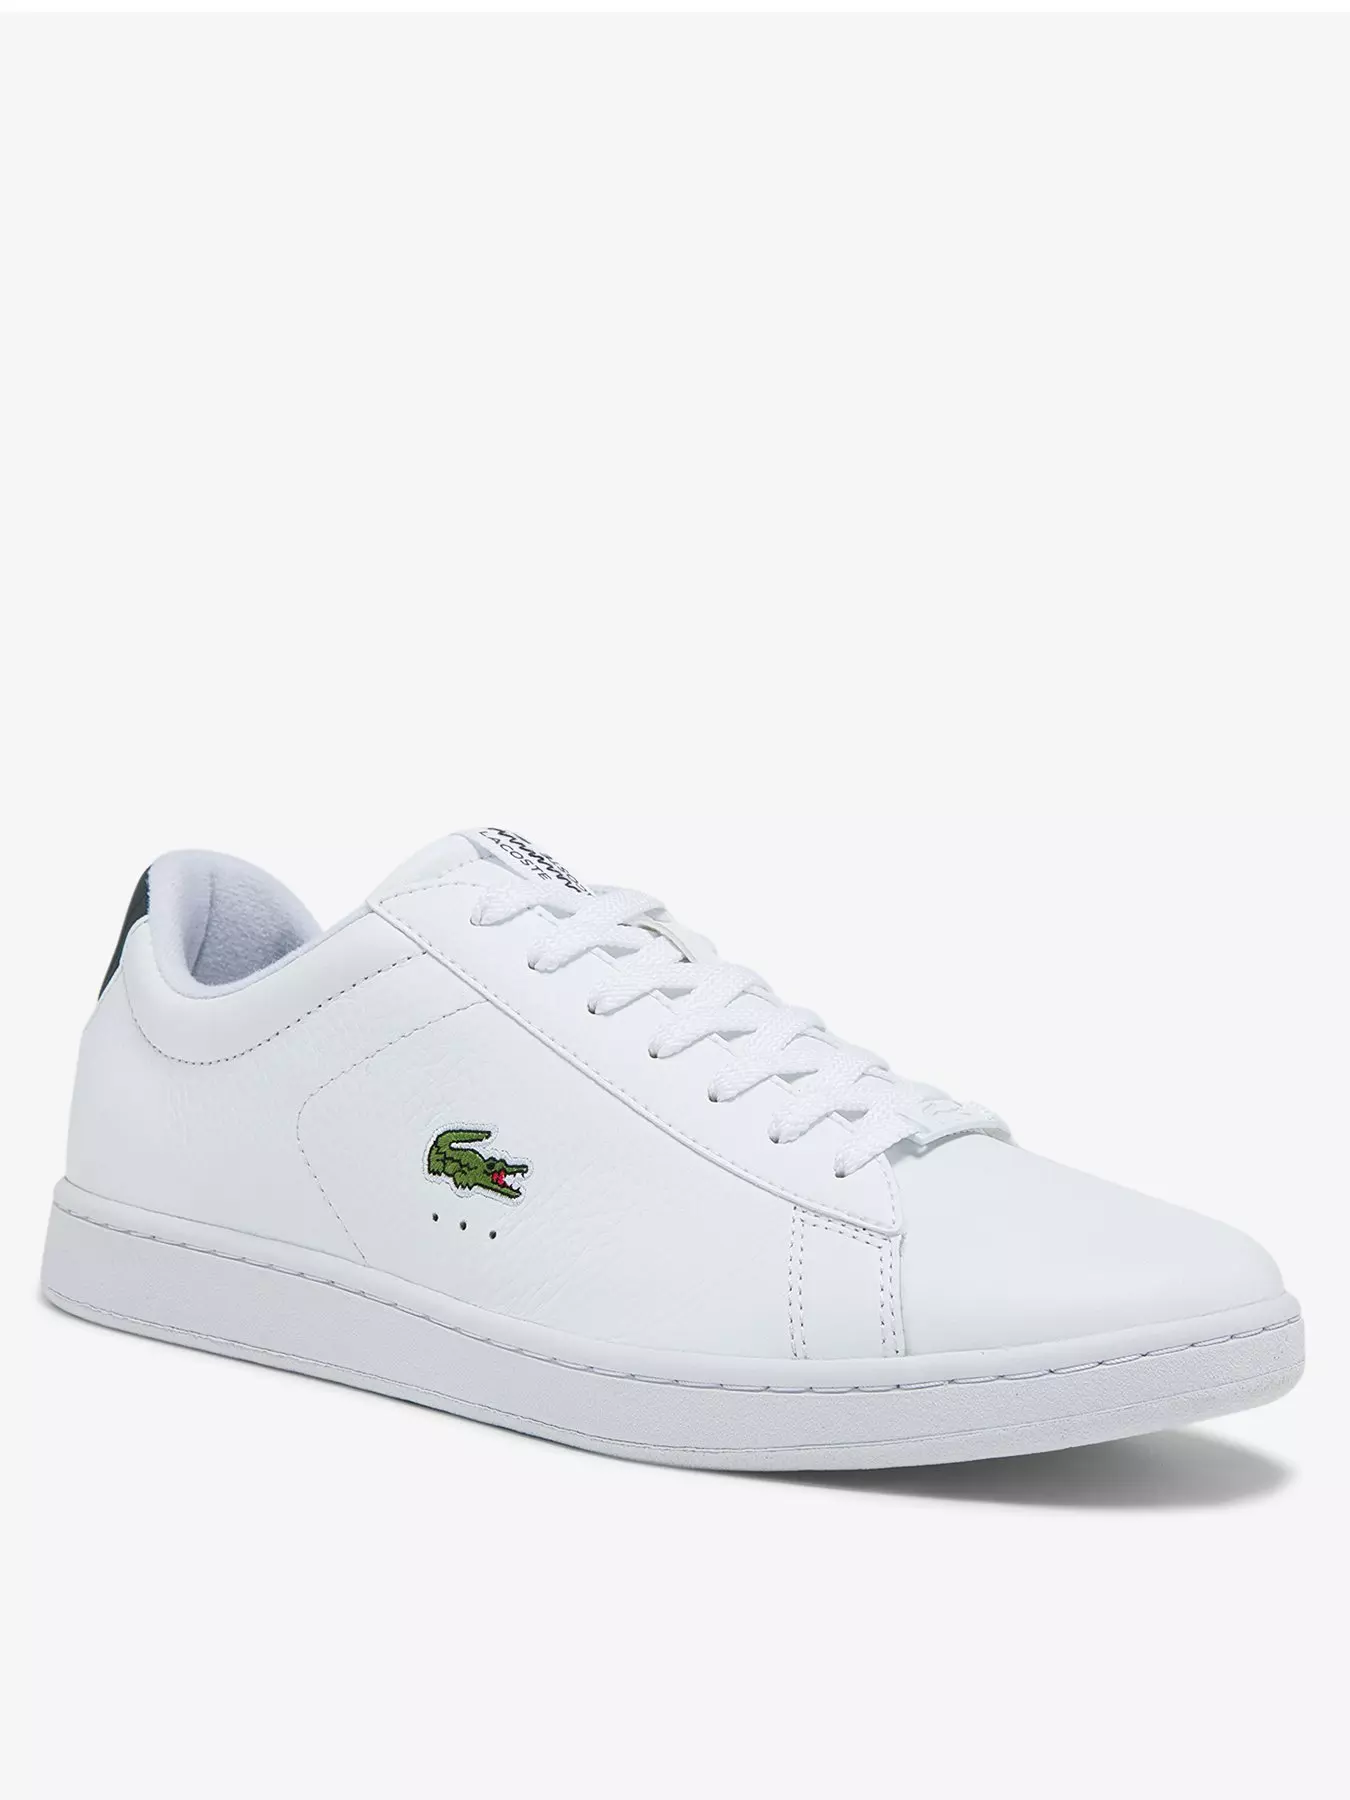 Mens | Lacoste | Very.co.uk